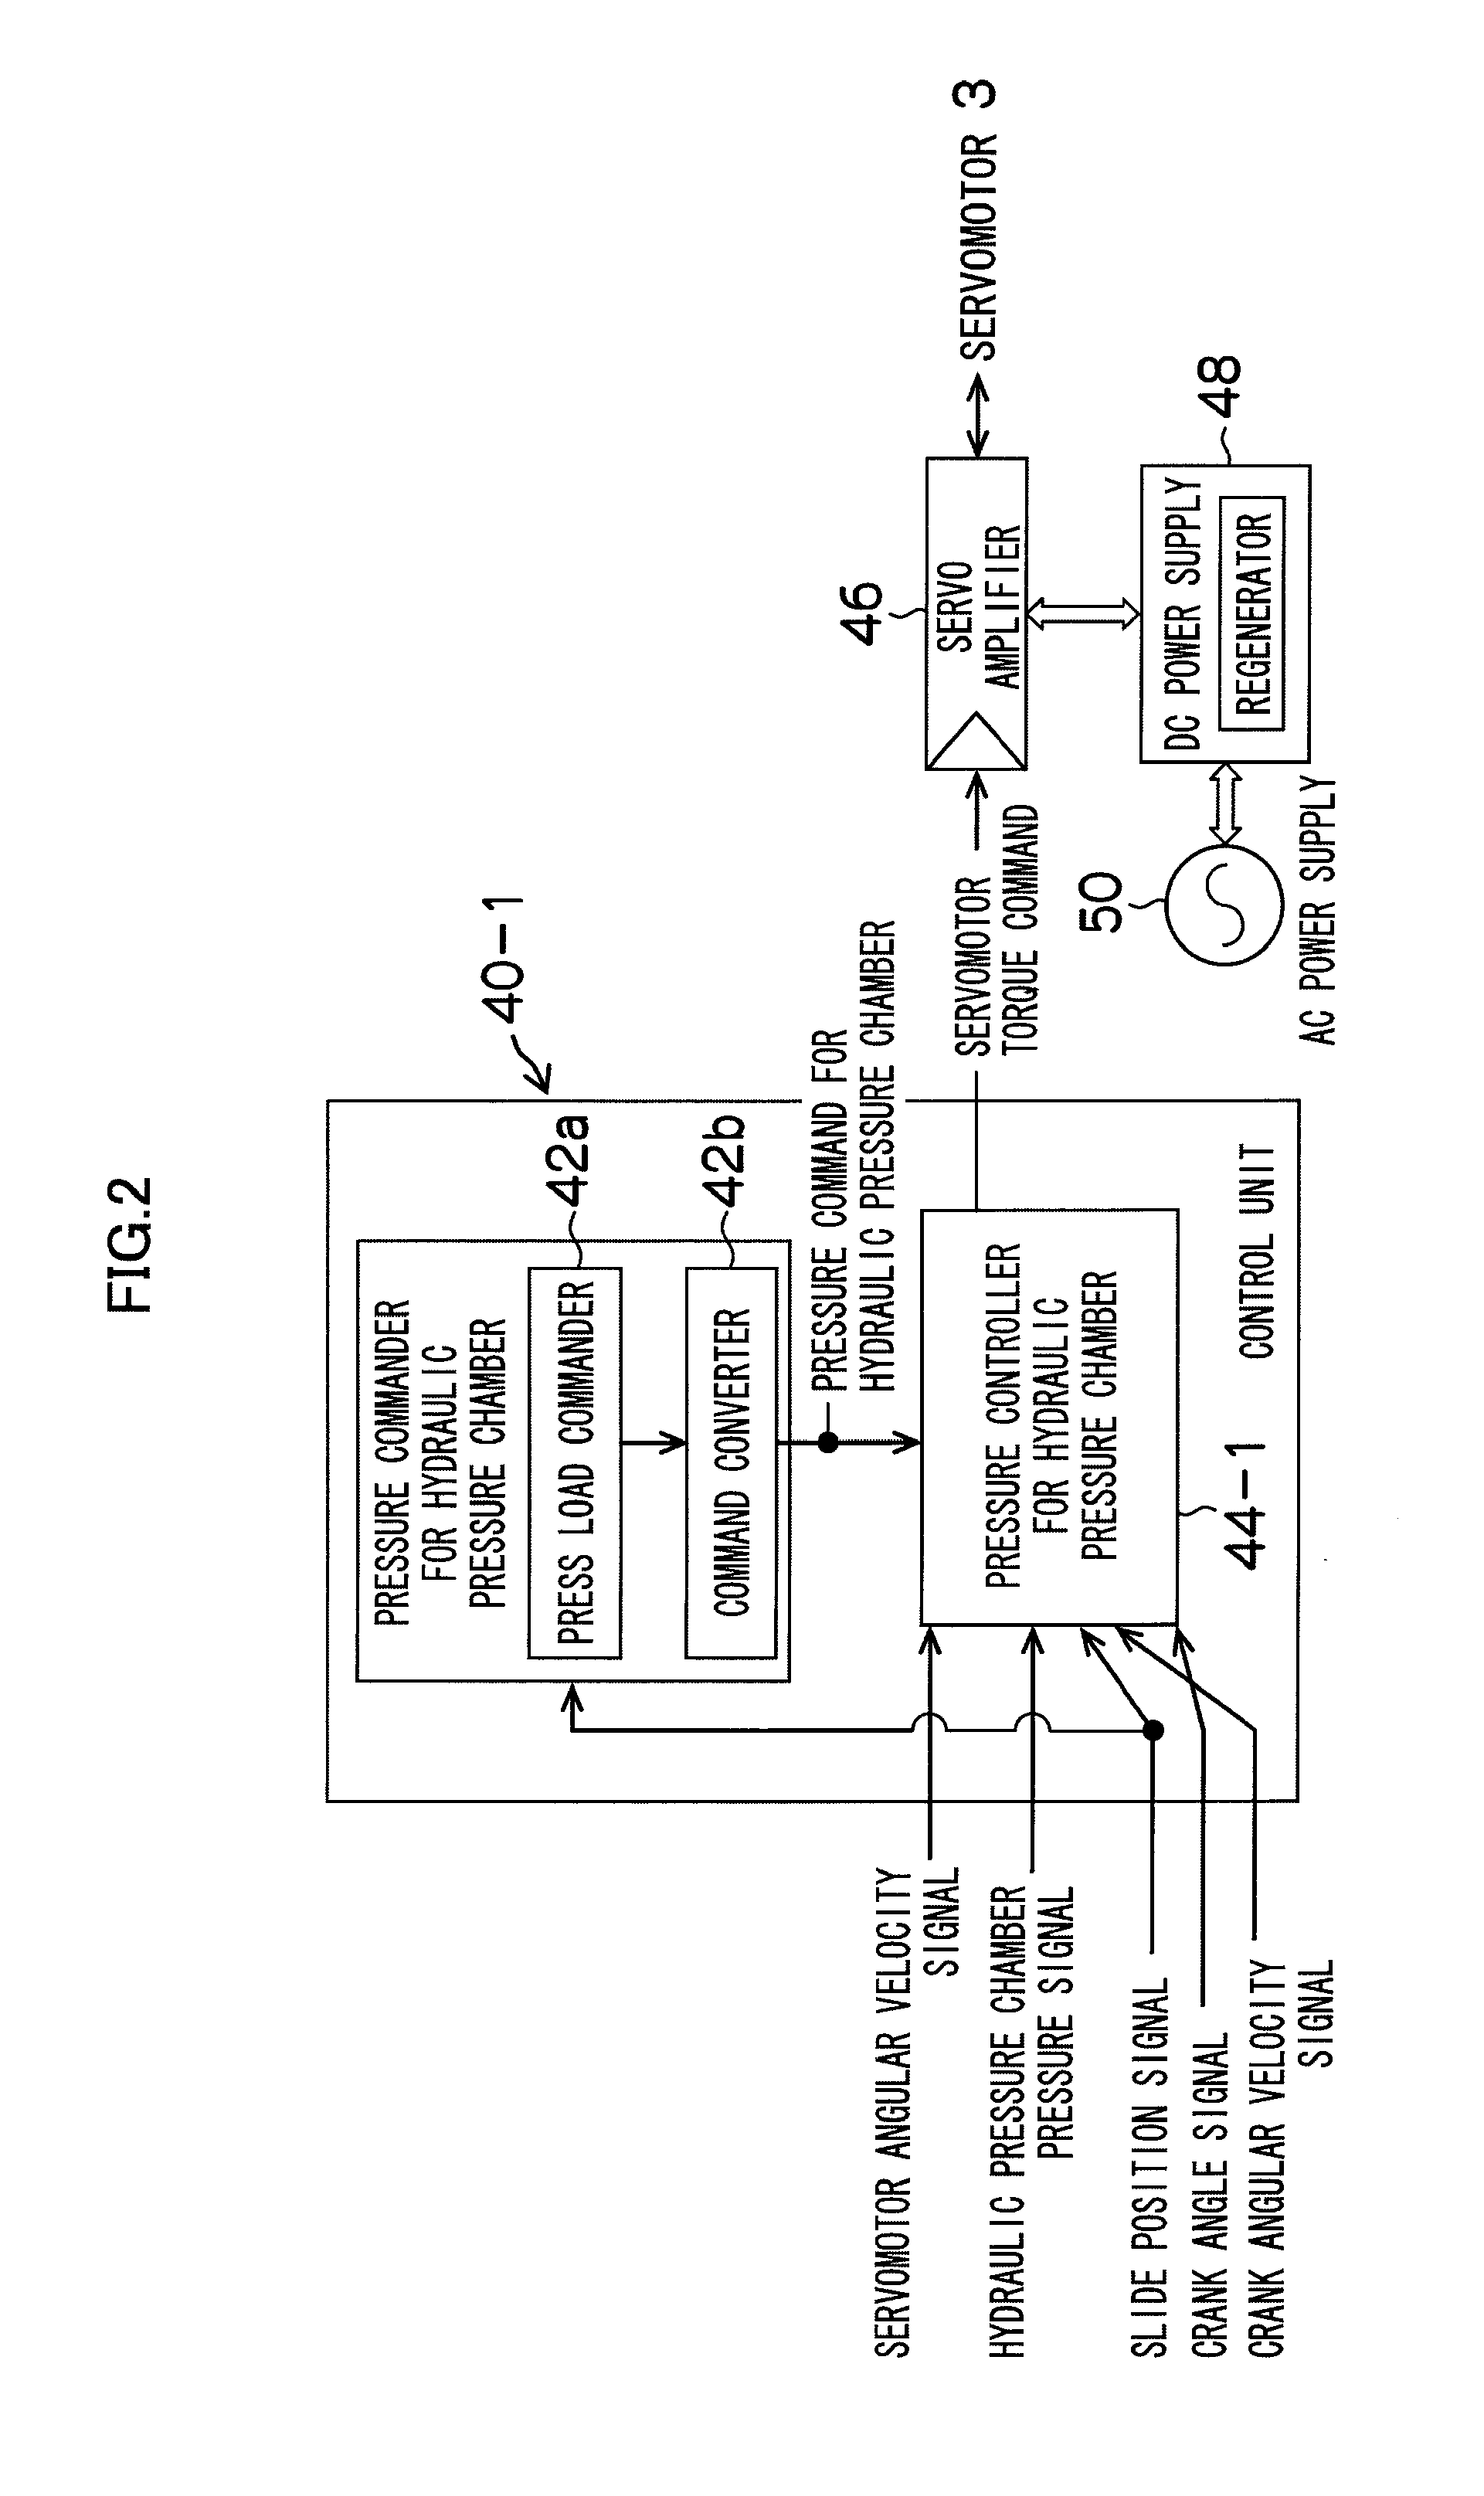 Press load controlling apparatus for mechanical press